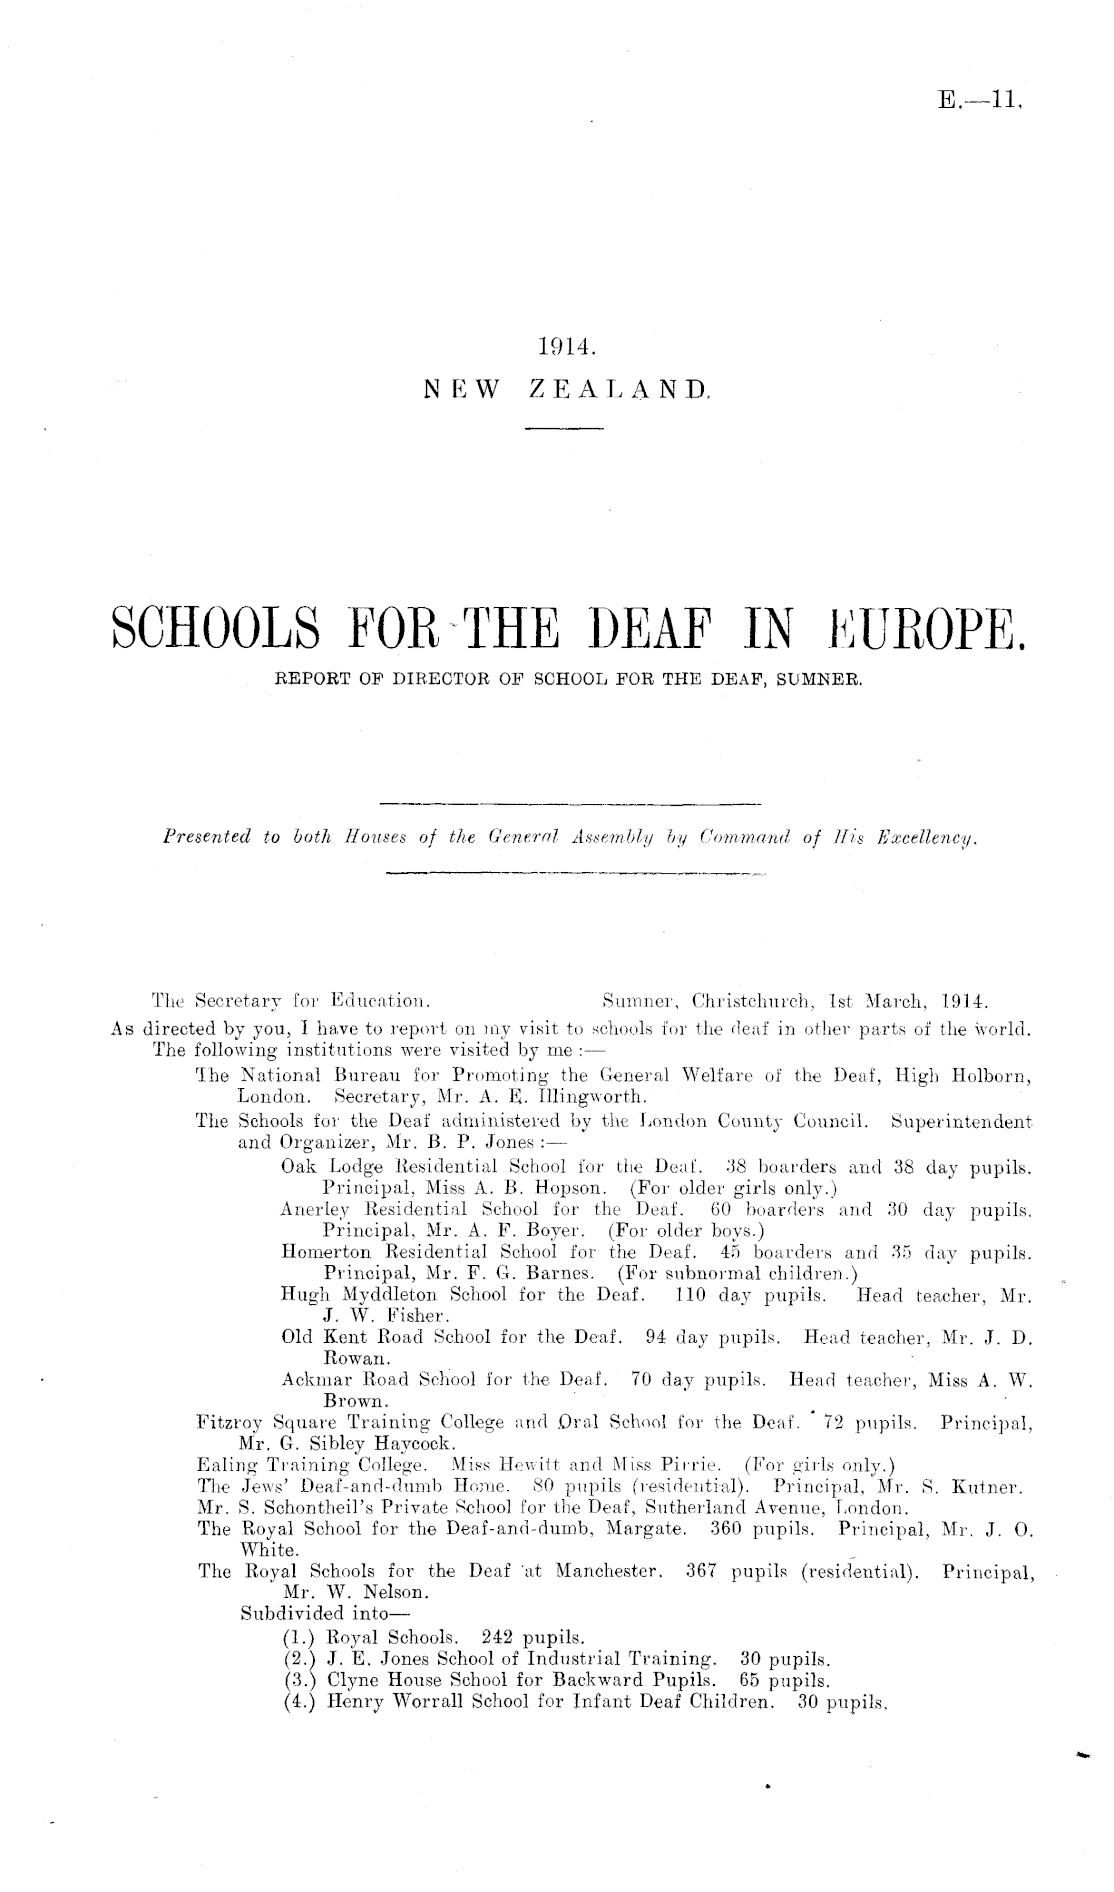 Papers Past, Parliamentary Papers, Appendix to the Journals of the House  of Representatives, 1914 Session I